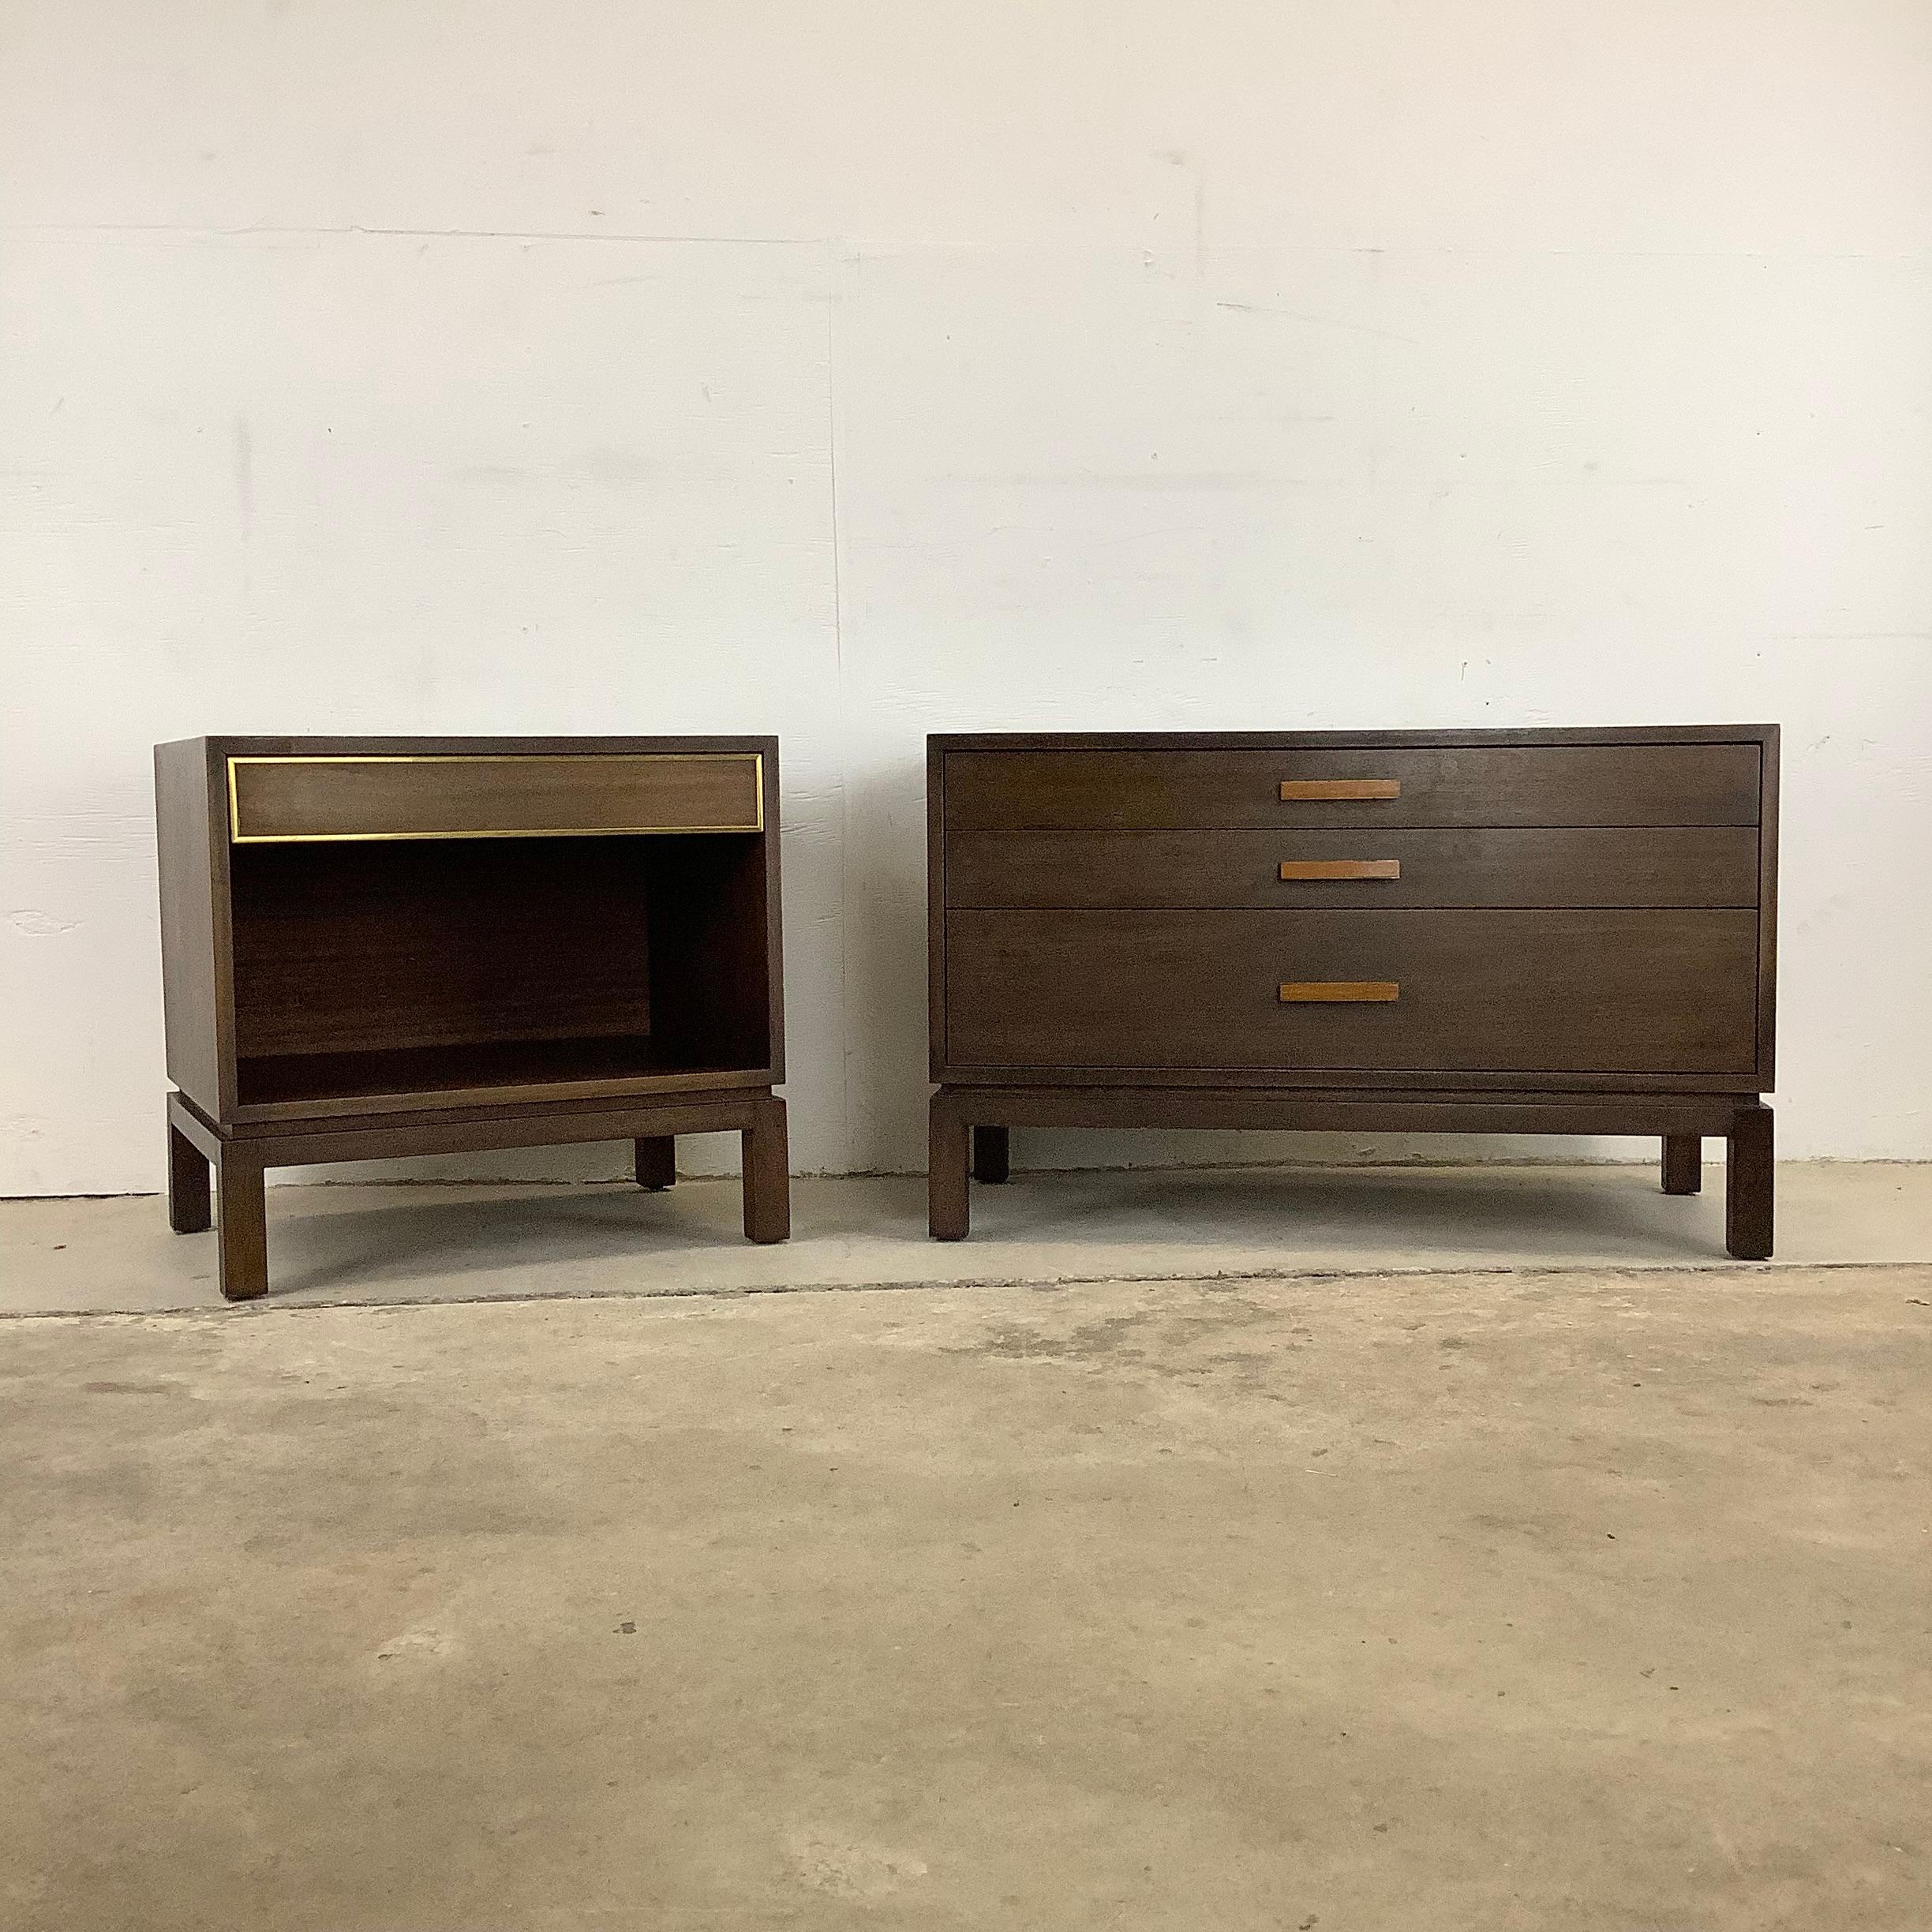 This stunning pair of Harvey Probber side tables make for unique nightstands- one with three wide storage drawers, the second with lower cabinet space and top drawer- ideal mix of storage and side table space. The incredible craftsmanship, wood